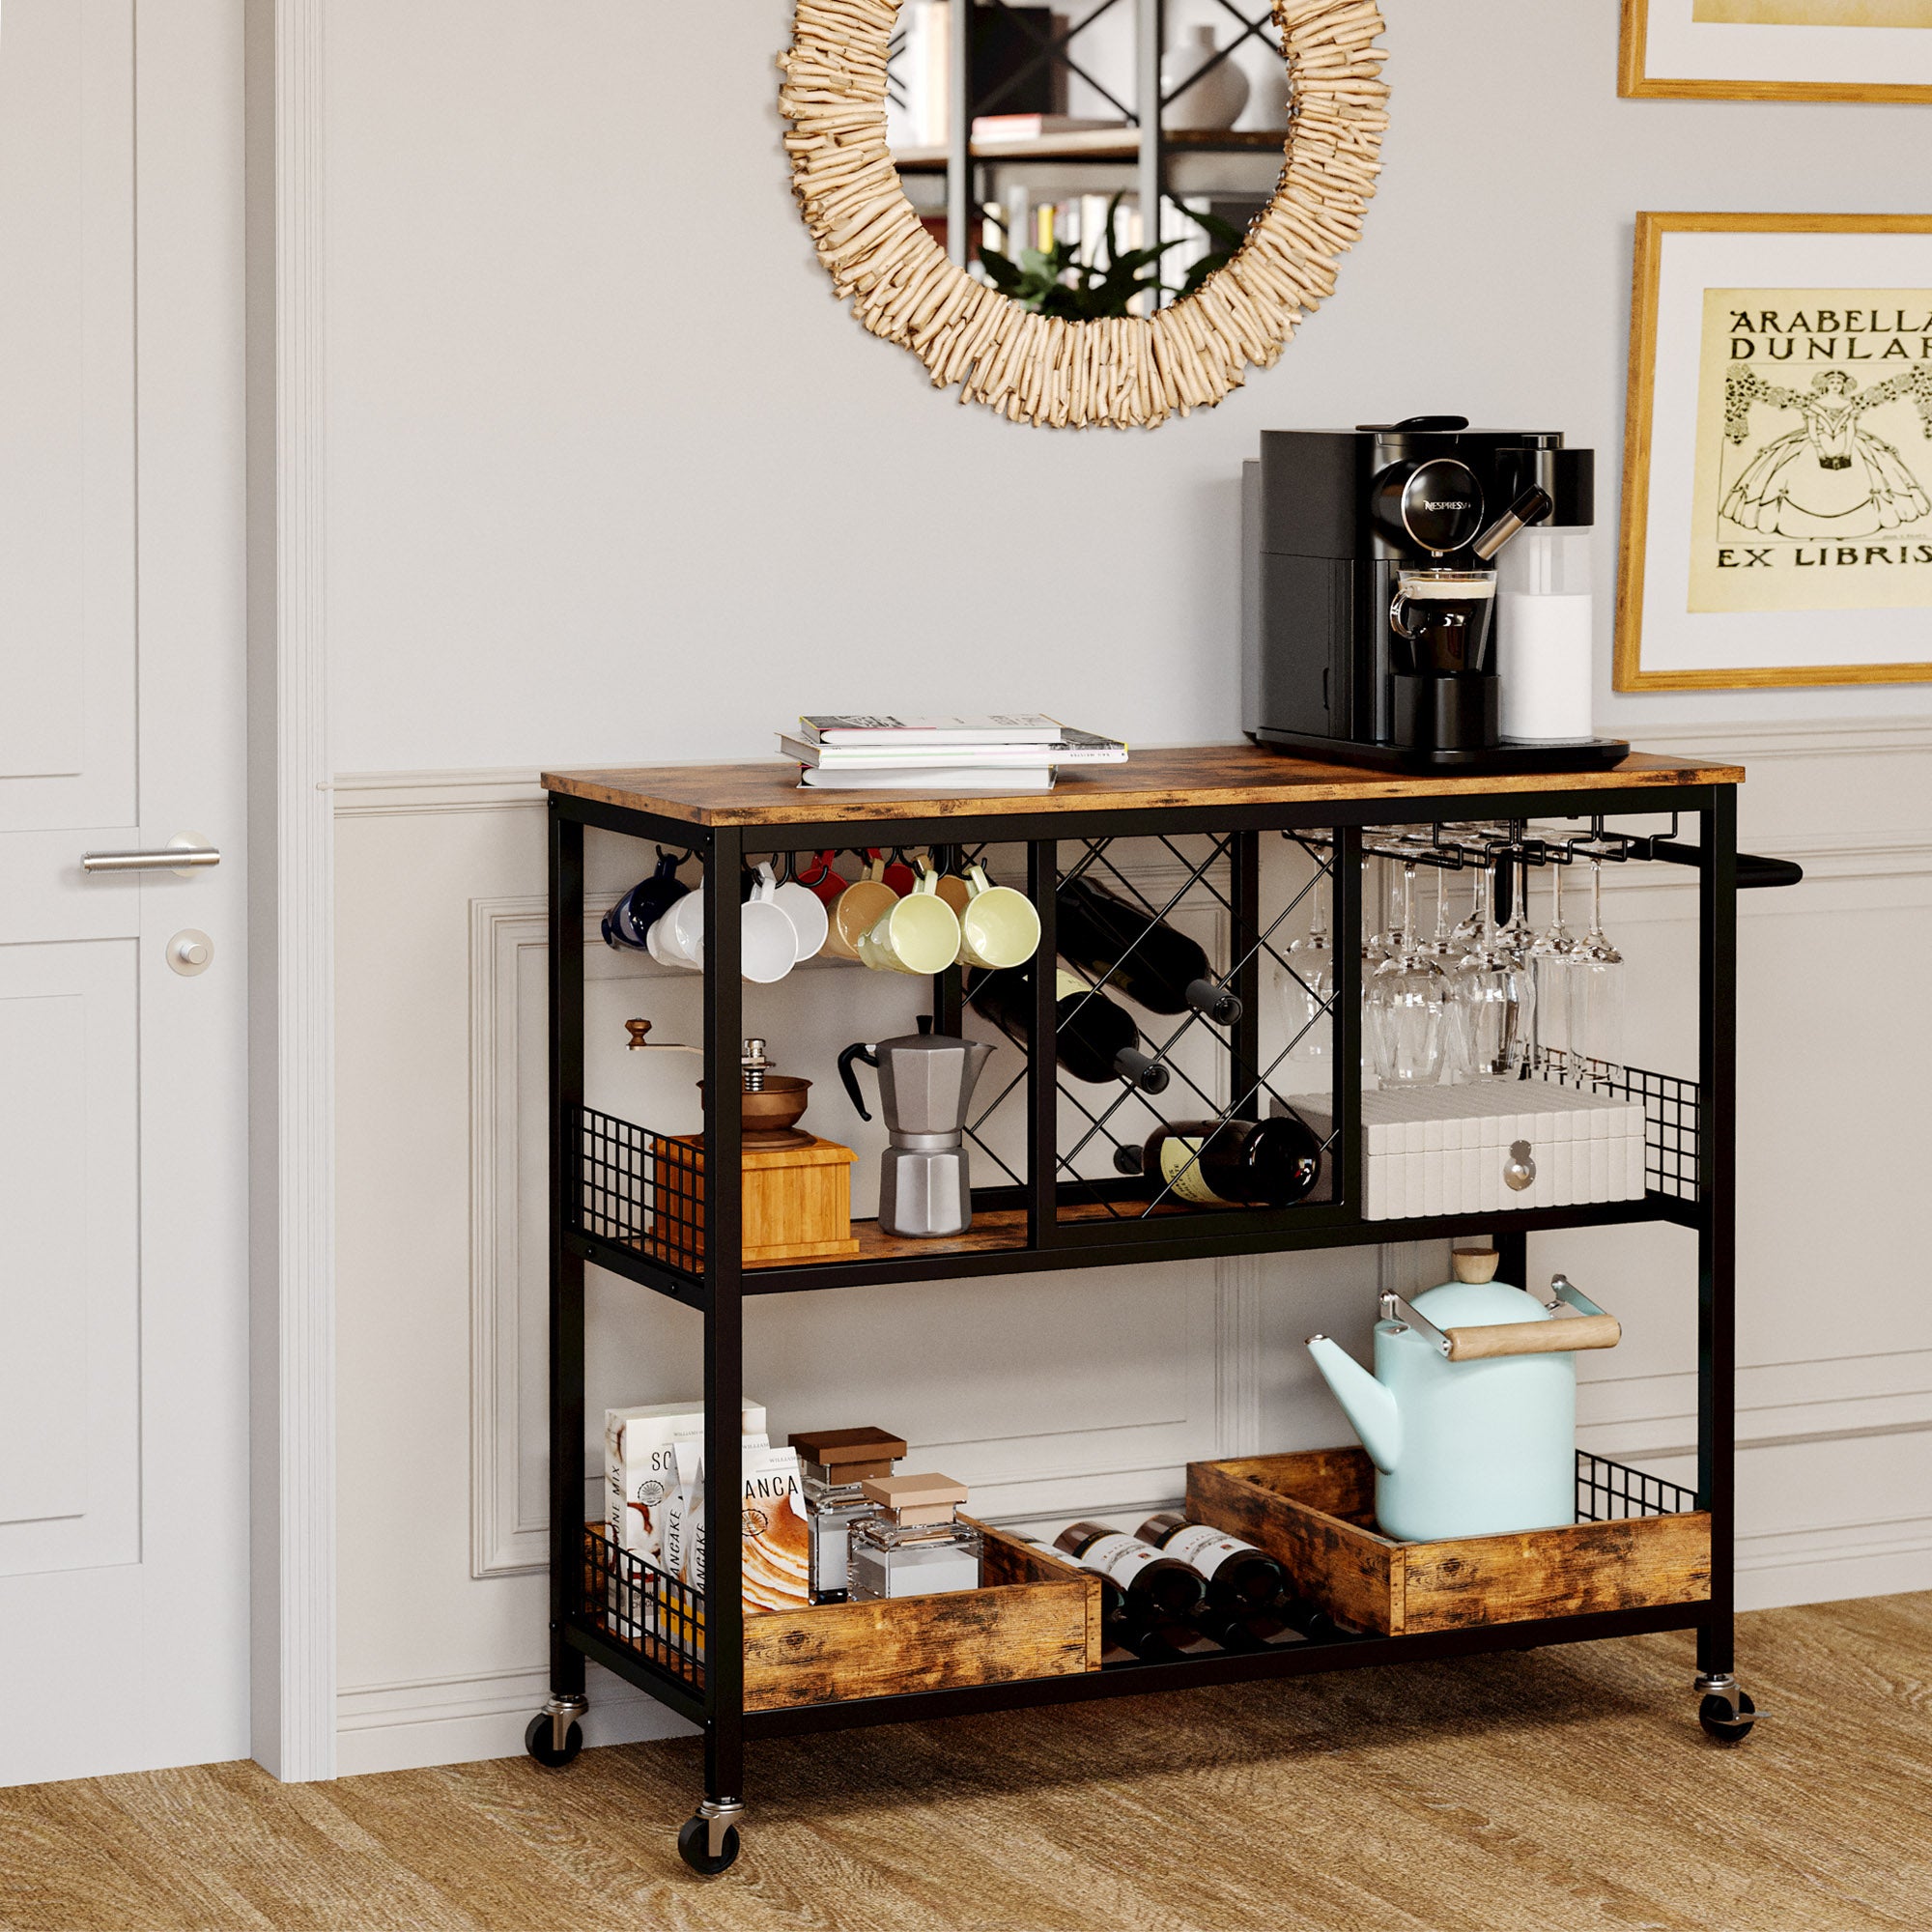 IRONCK Wine Rack Table， Industrial Bar Cart on Wheels Kitchen Storage Cart for the Home， Rustic Brown